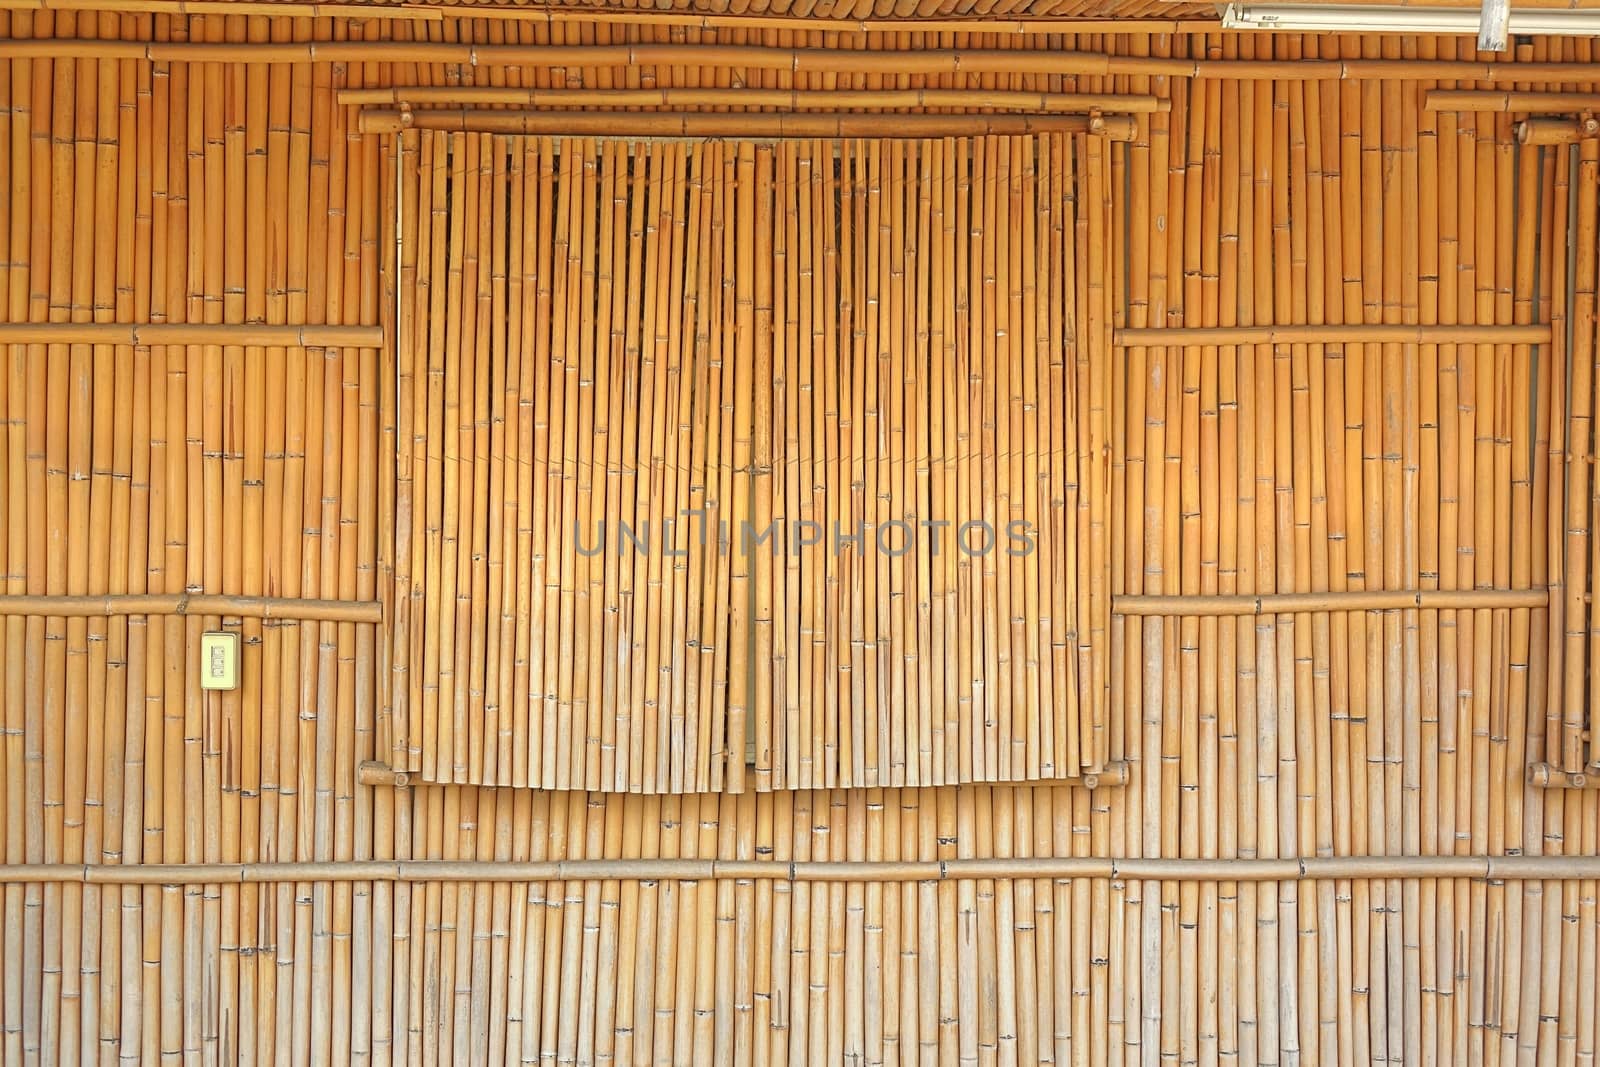 The wall and window shutters of a house are made from bamboo poles
